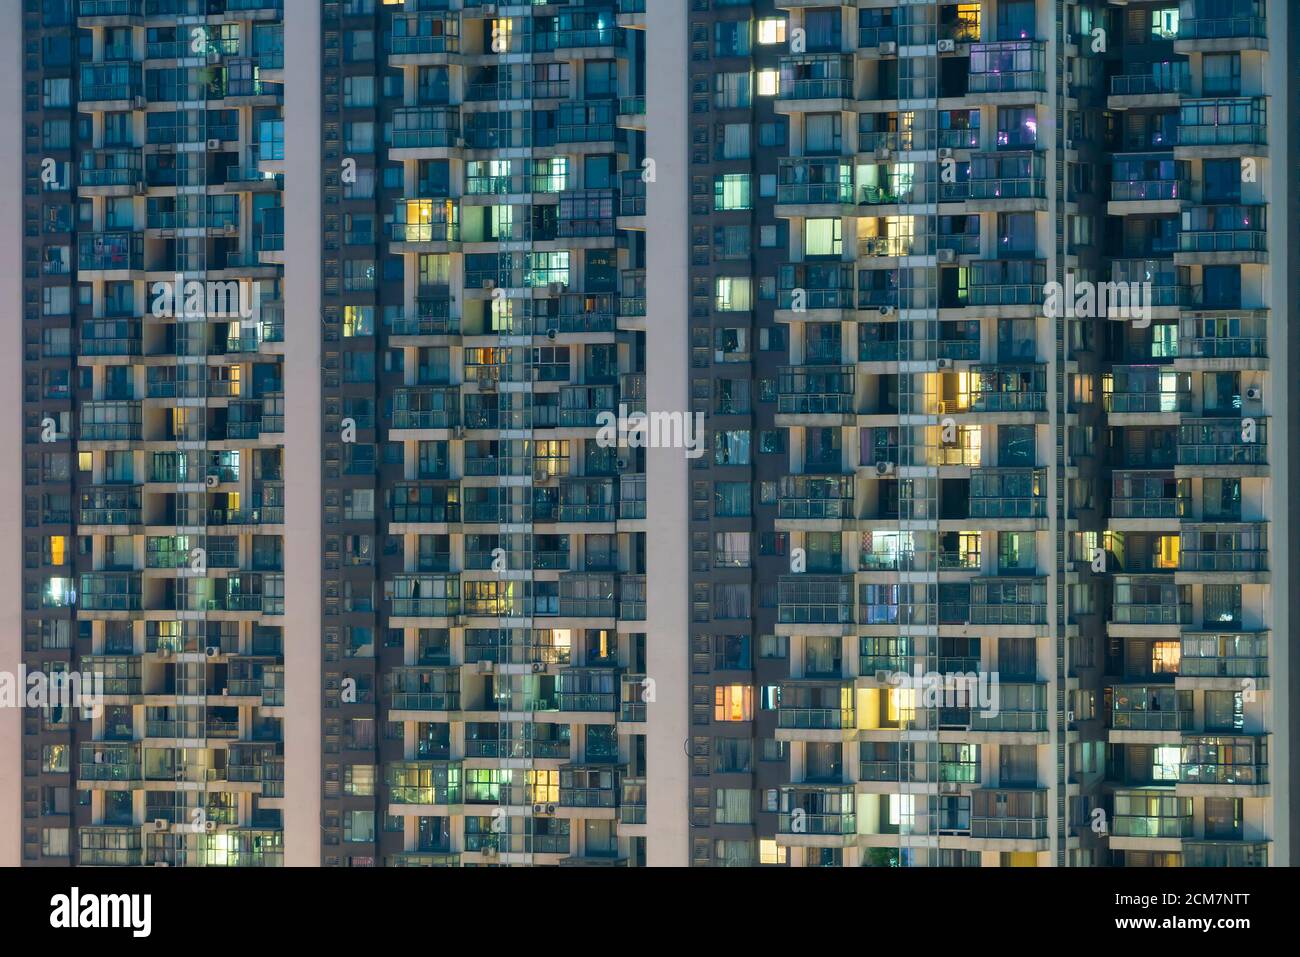 High rise apartment buildings in China at night Stock Photo